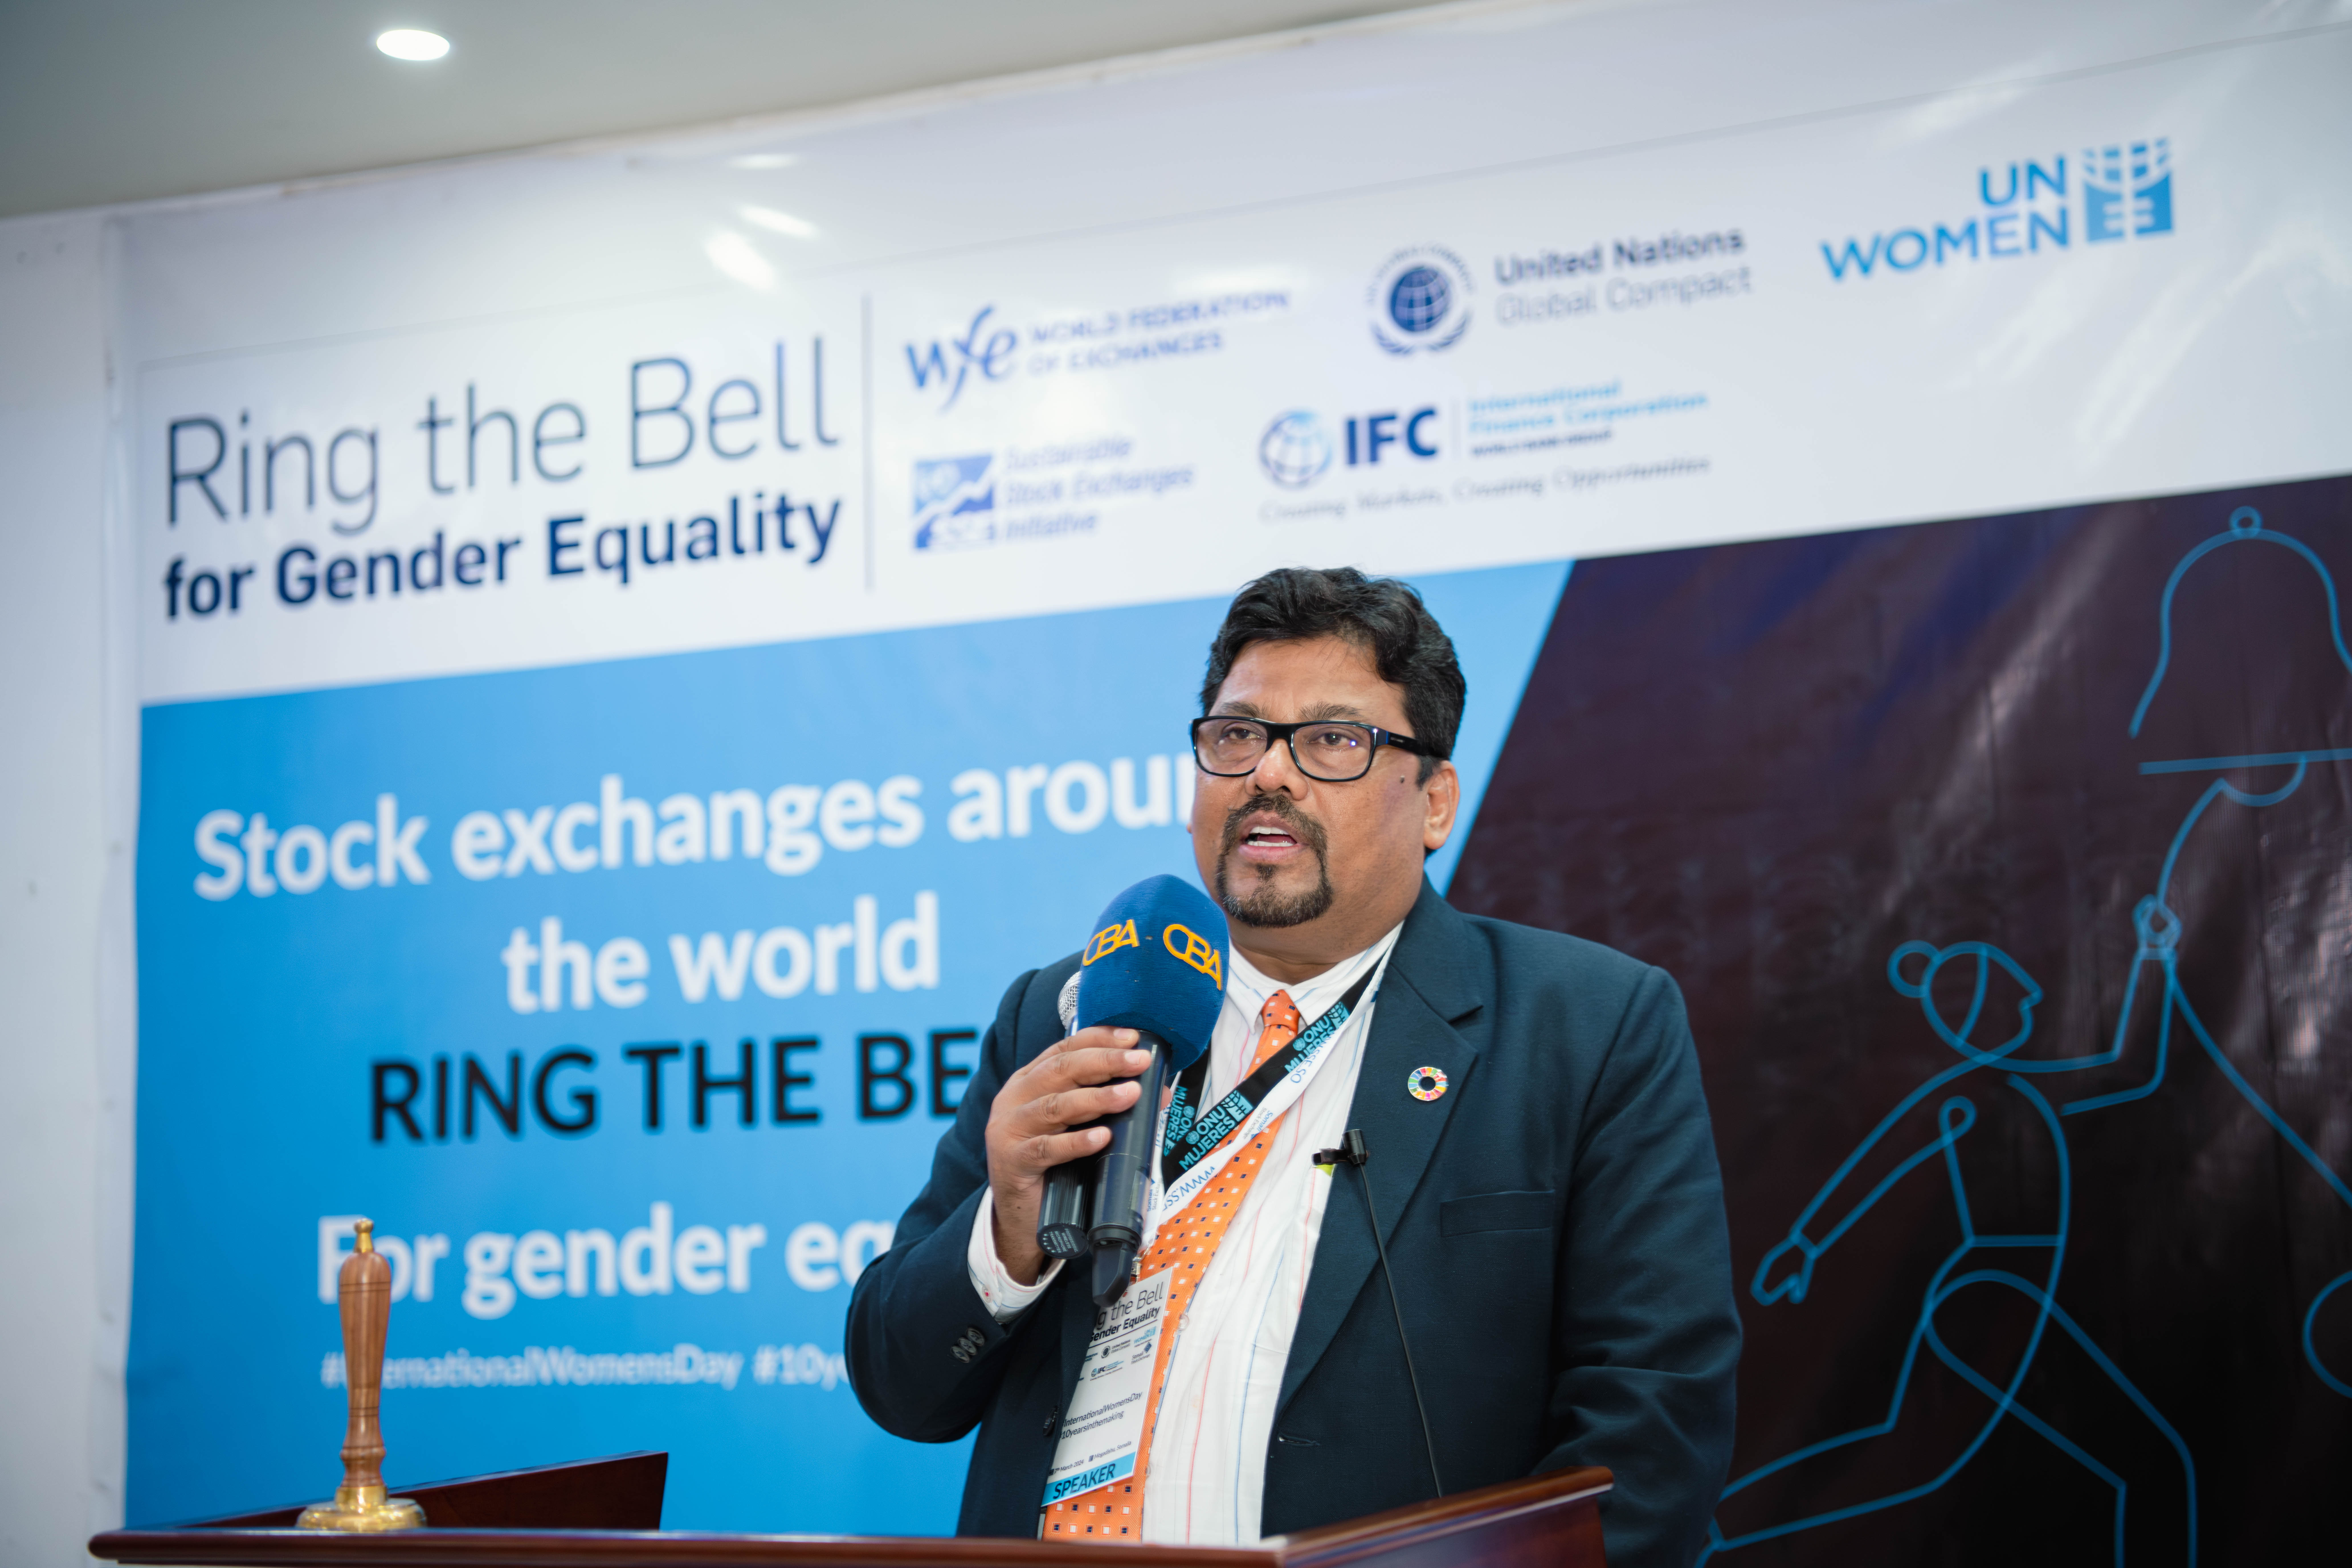 UN Women Somalia country programme manager making opening remarks in the Ring the Bell event. Photo: UNSOM SCPAG/Muktar